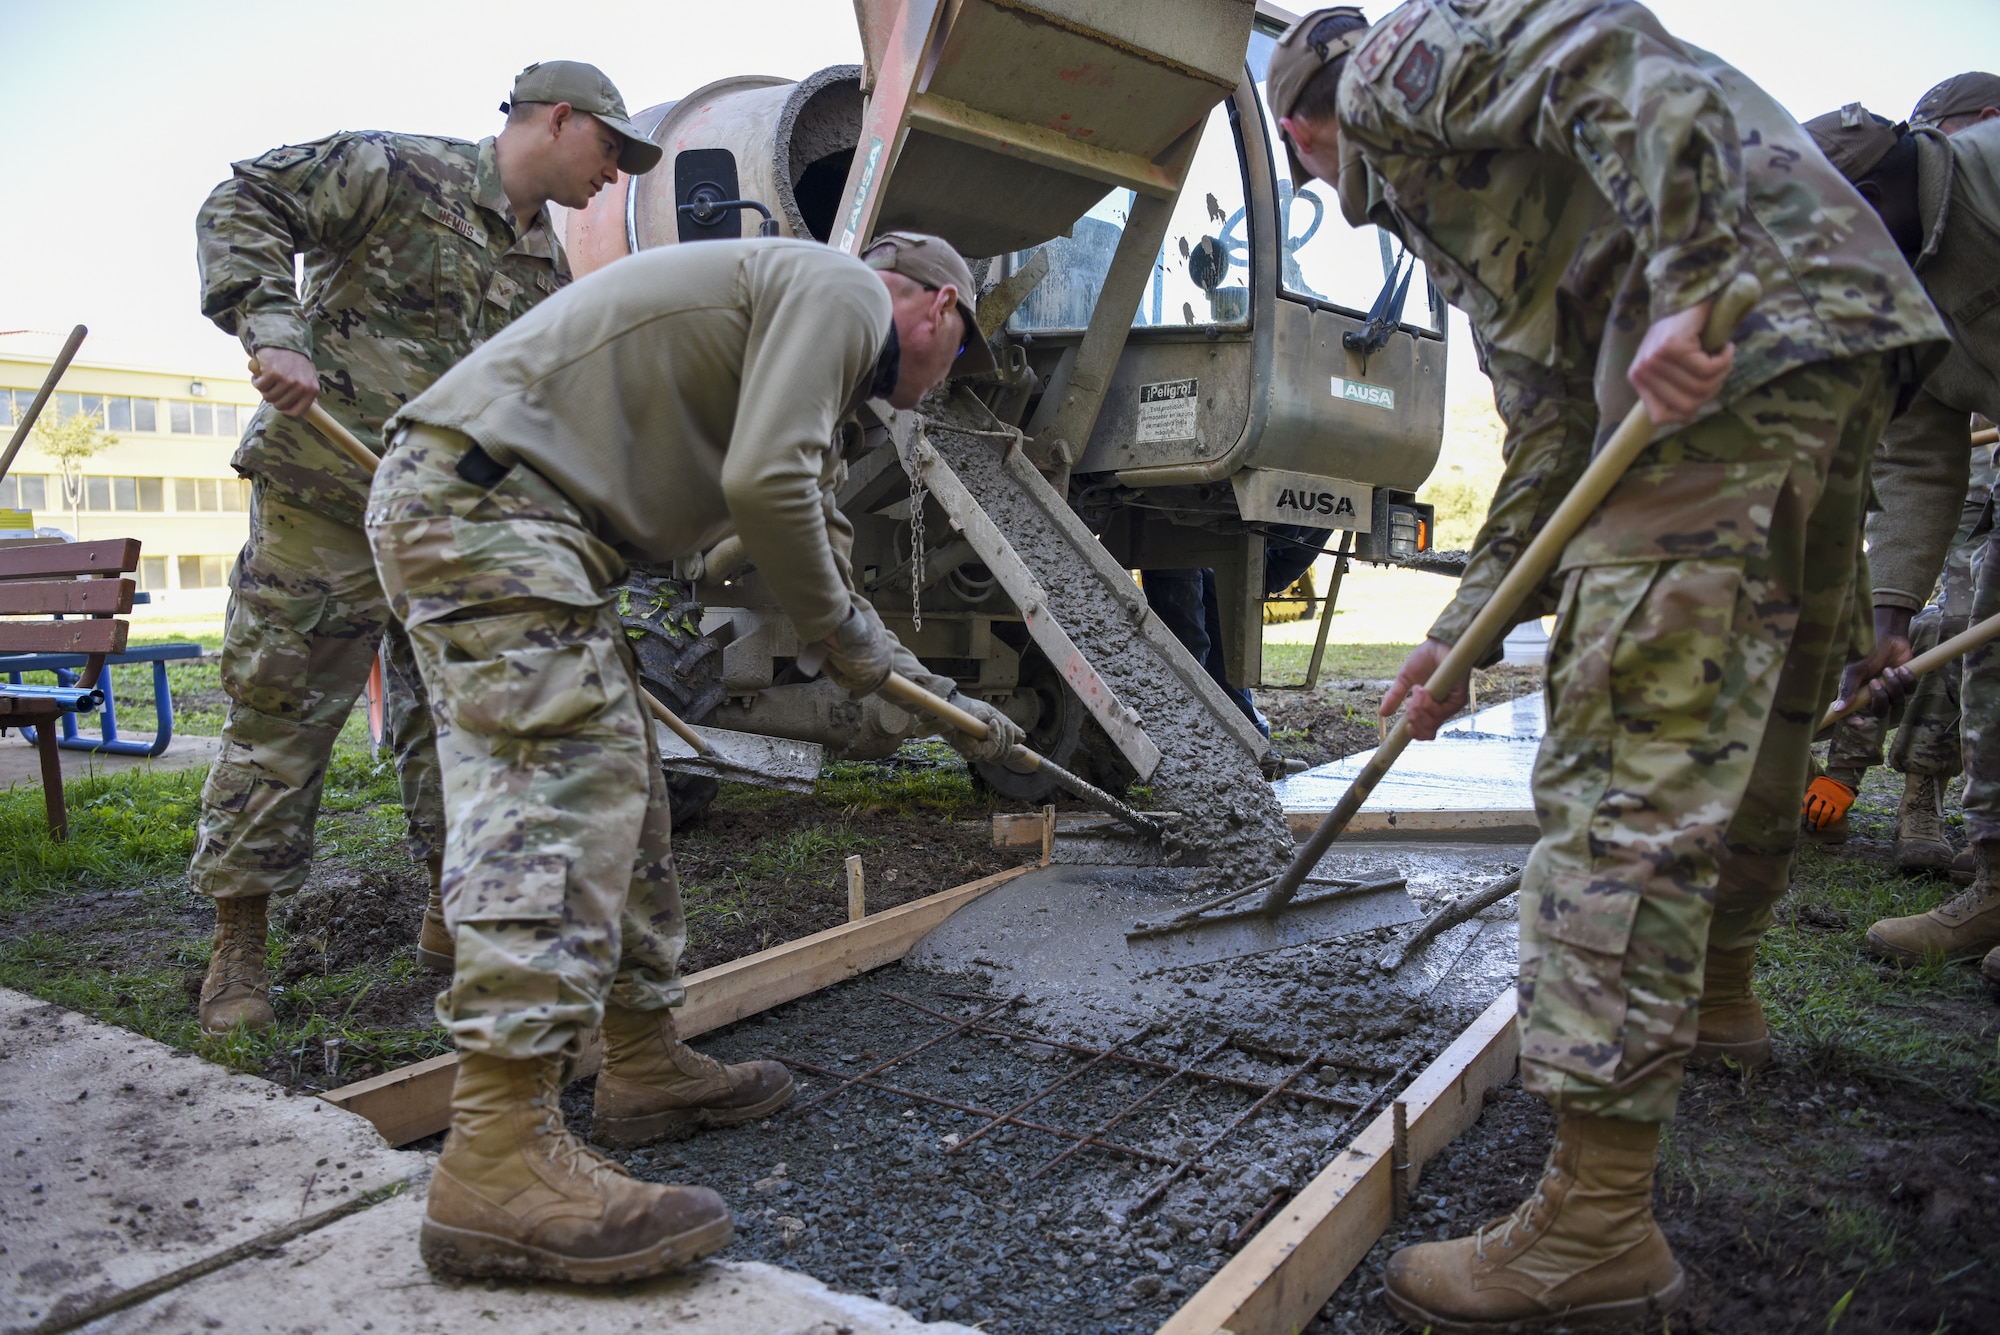 U.S. Air Force Airmen from the 911th Civil Engineer Squadron spread wet concrete that was poured to repair a sidewalk on Morón Air Base, Spain, April 1, 2022. Airmen from the 911 CES, out of Pittsburgh, Pa., spent their annual reserve tour at Morón AB where they aided the local CE shop on a few major projects.